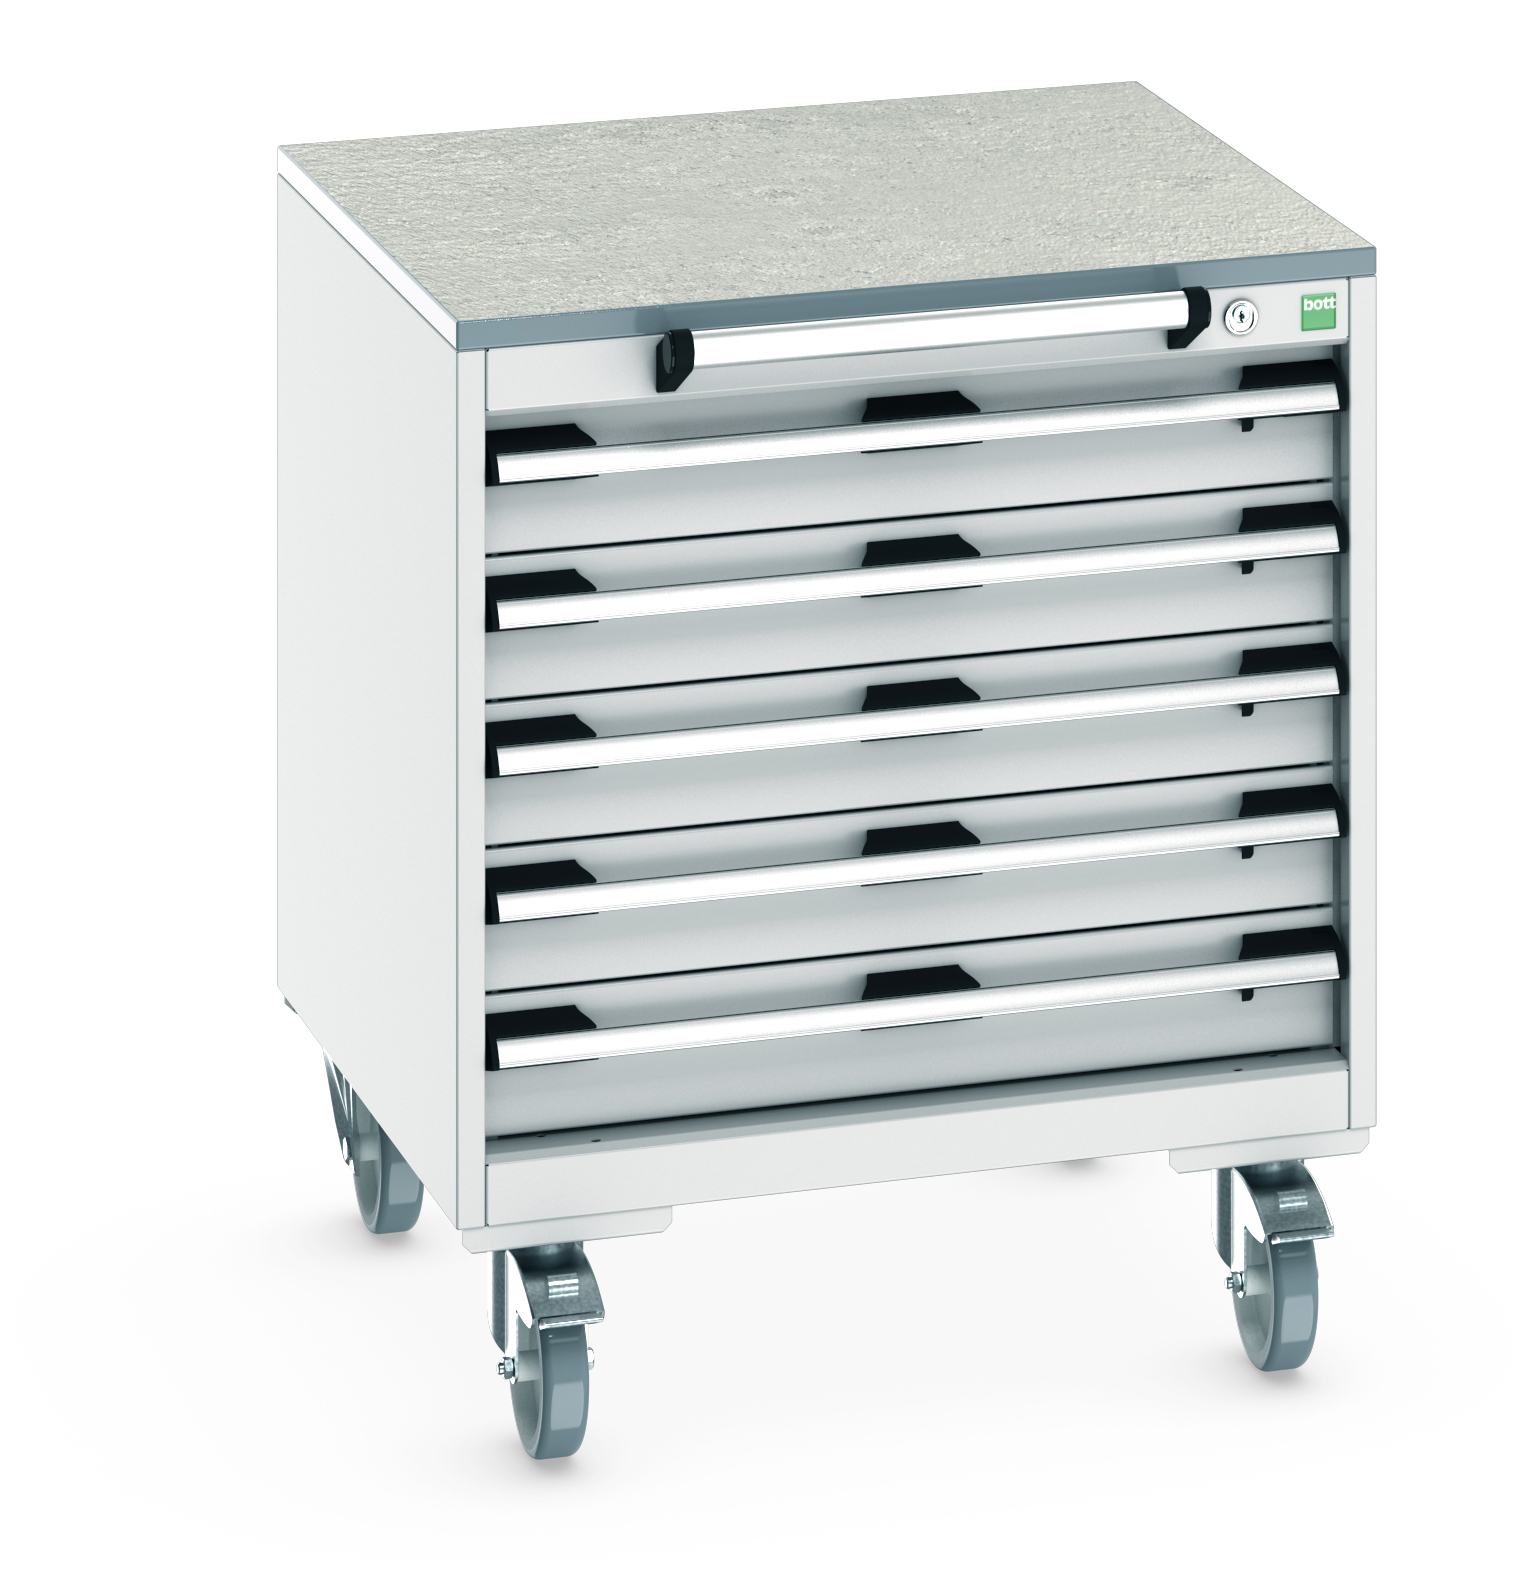 Bott Cubio Mobile Drawer Cabinet With 5 Drawers & Lino Worktop - 40402146.16V